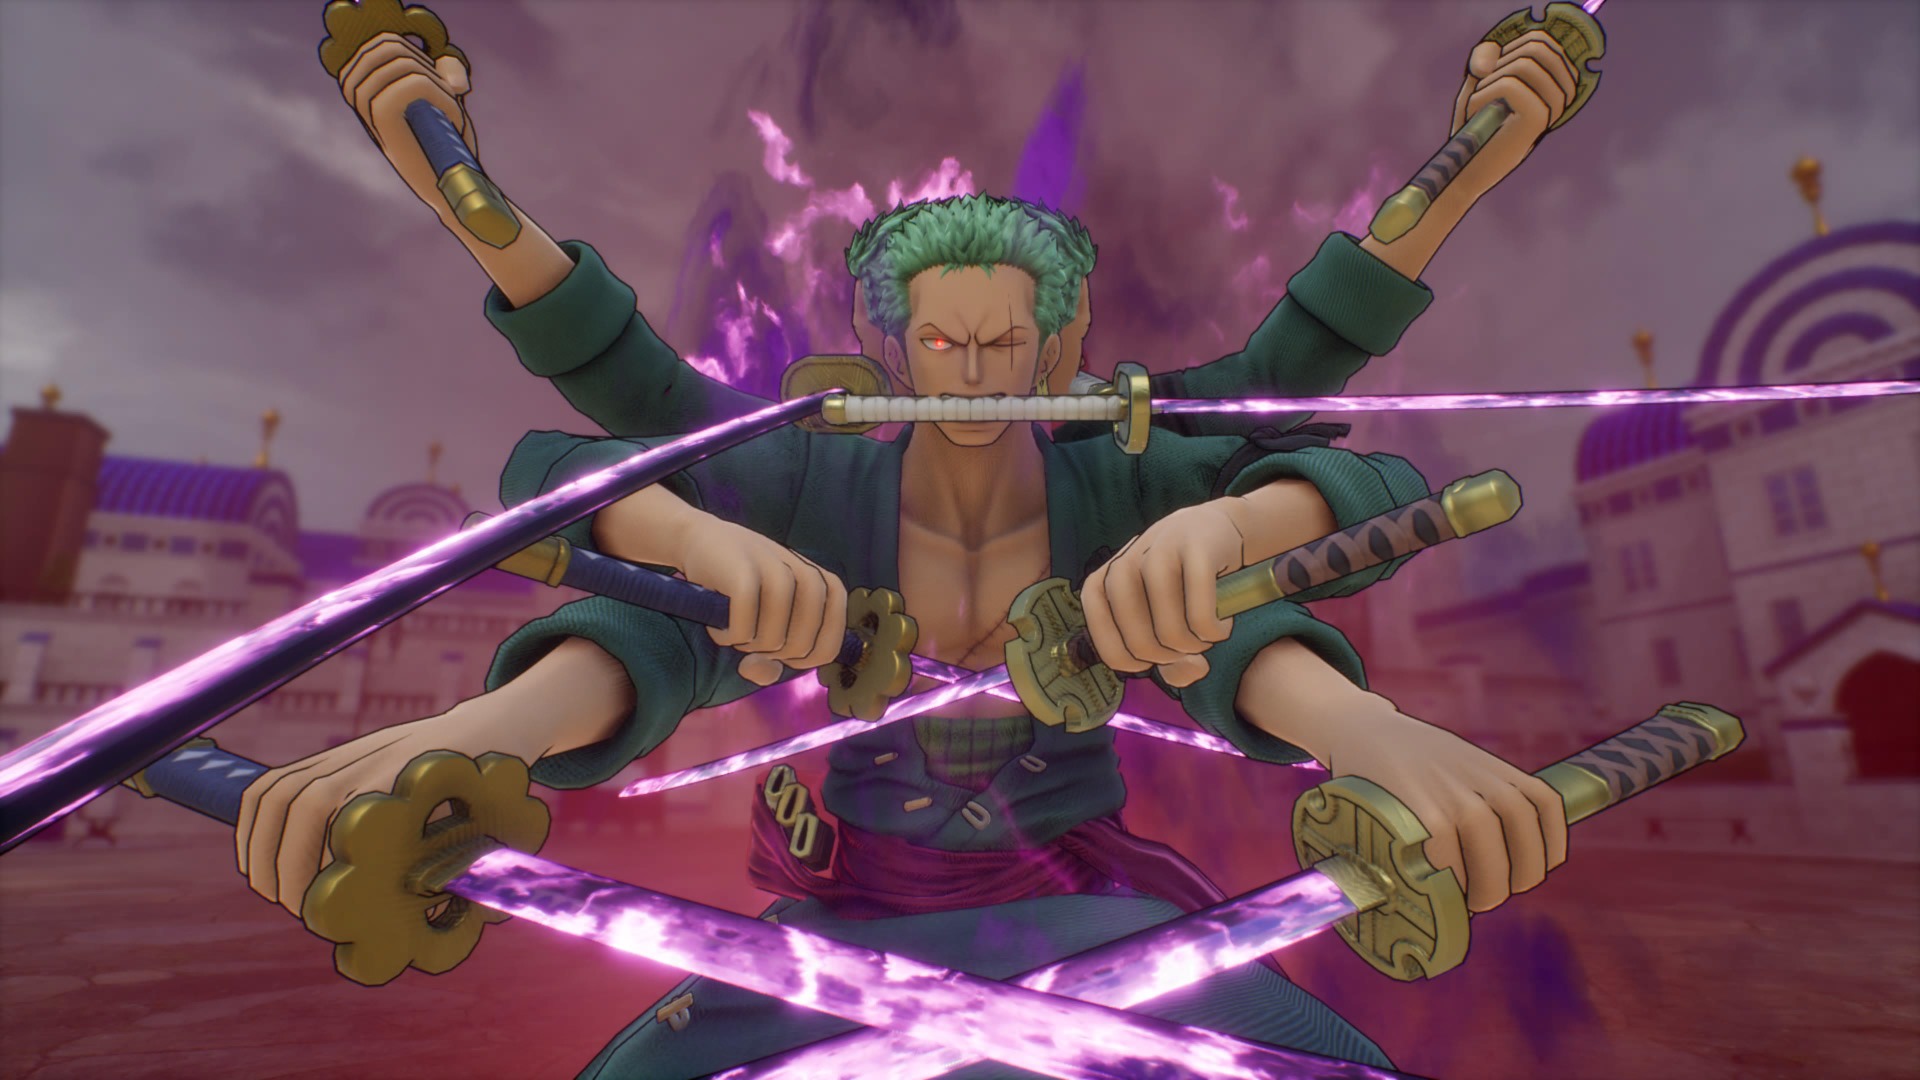 More one piece anime content, one piece odyssey zoro map